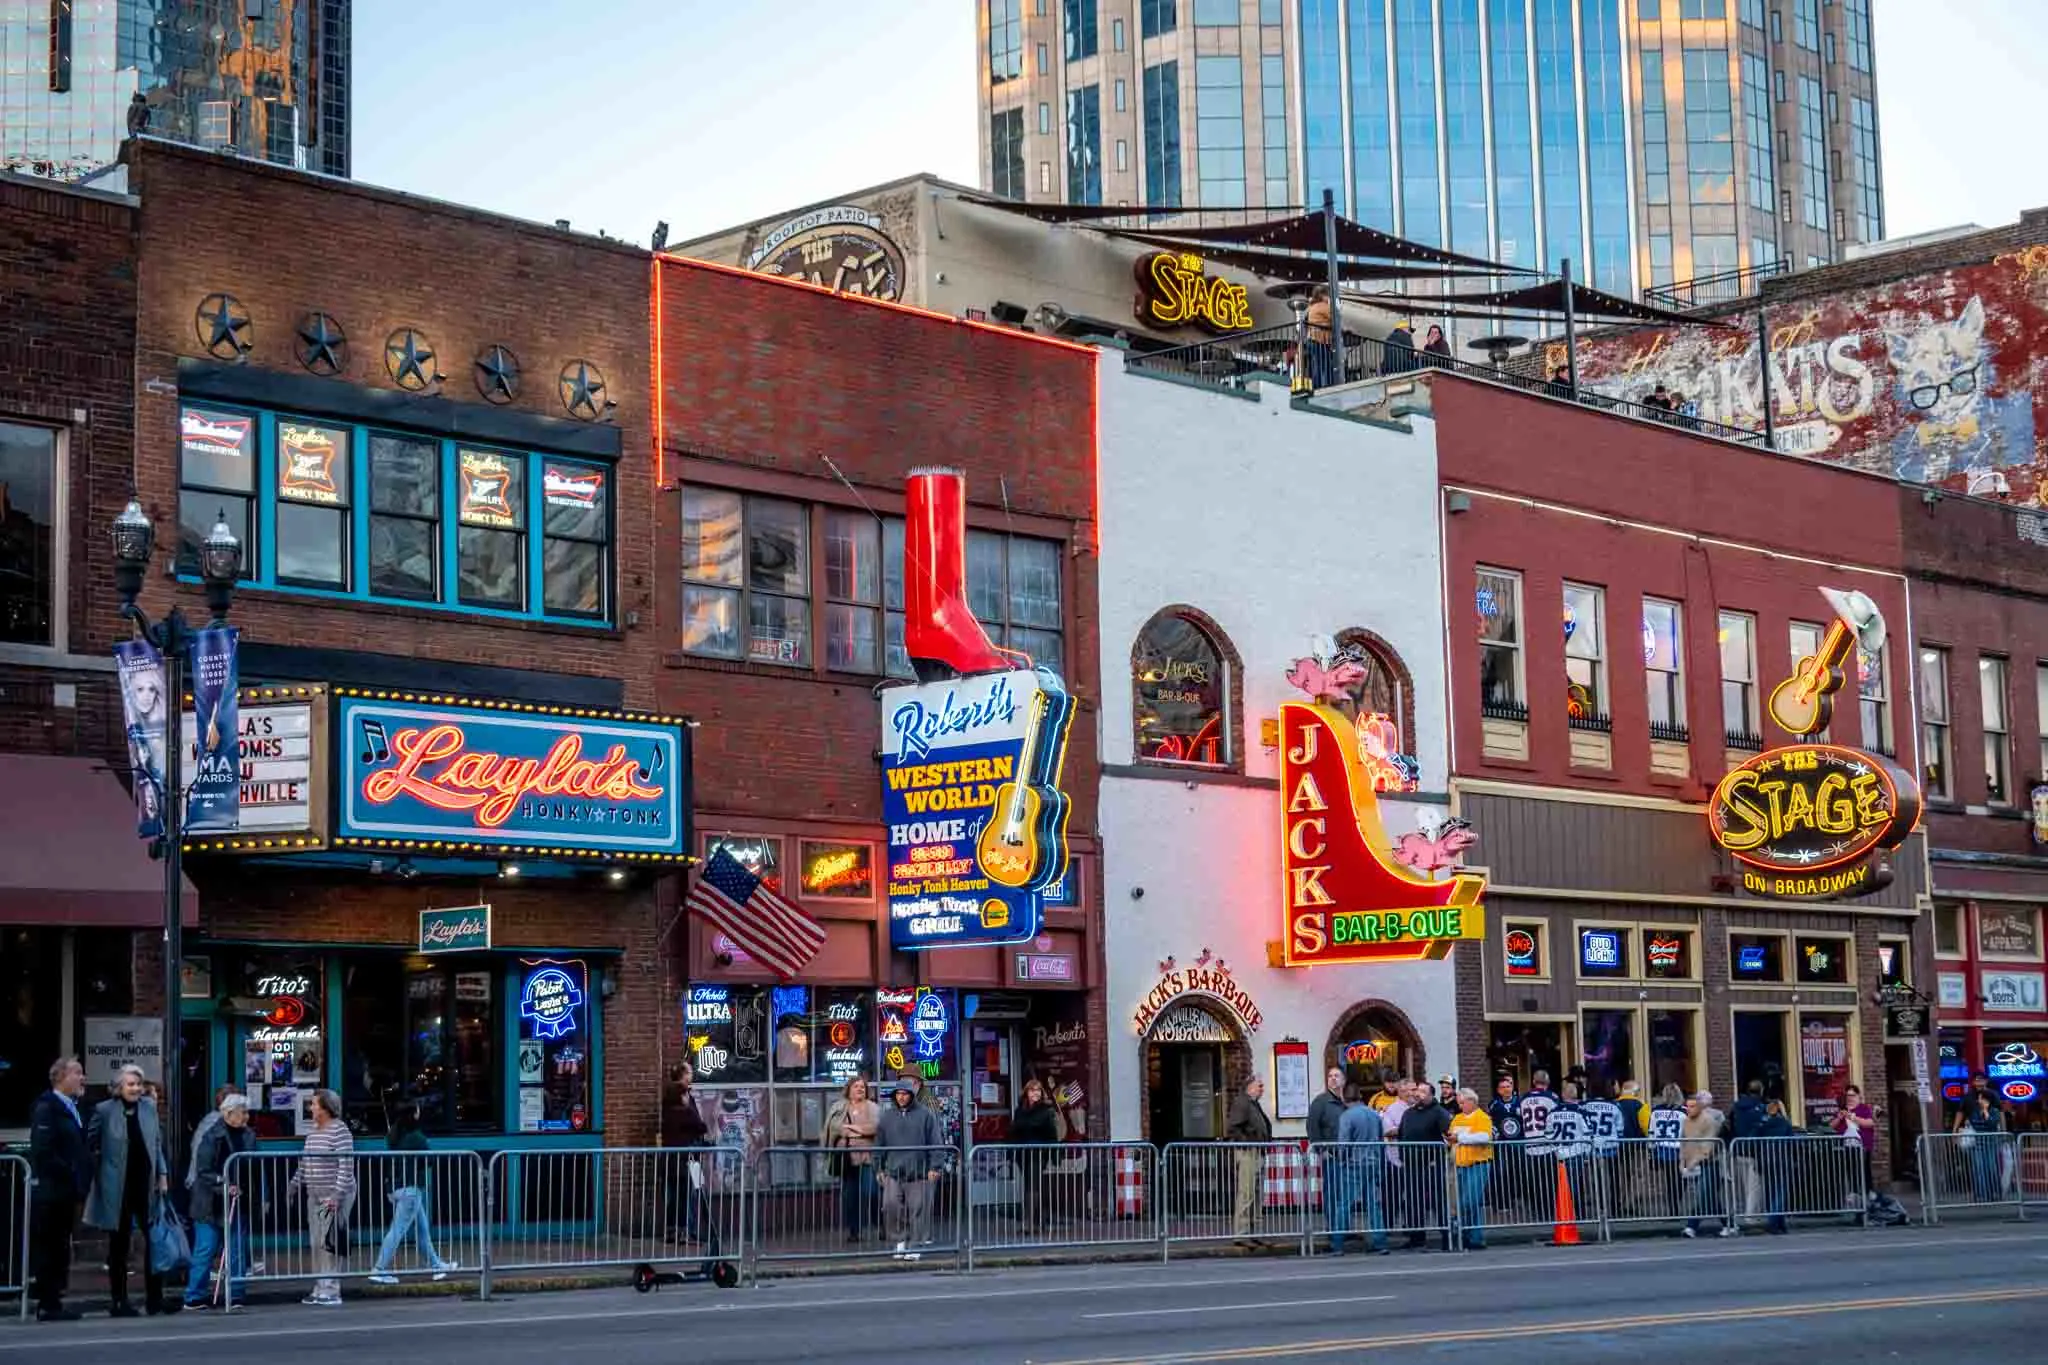 Exteriors and neon signs on a street of honky tonks and bars